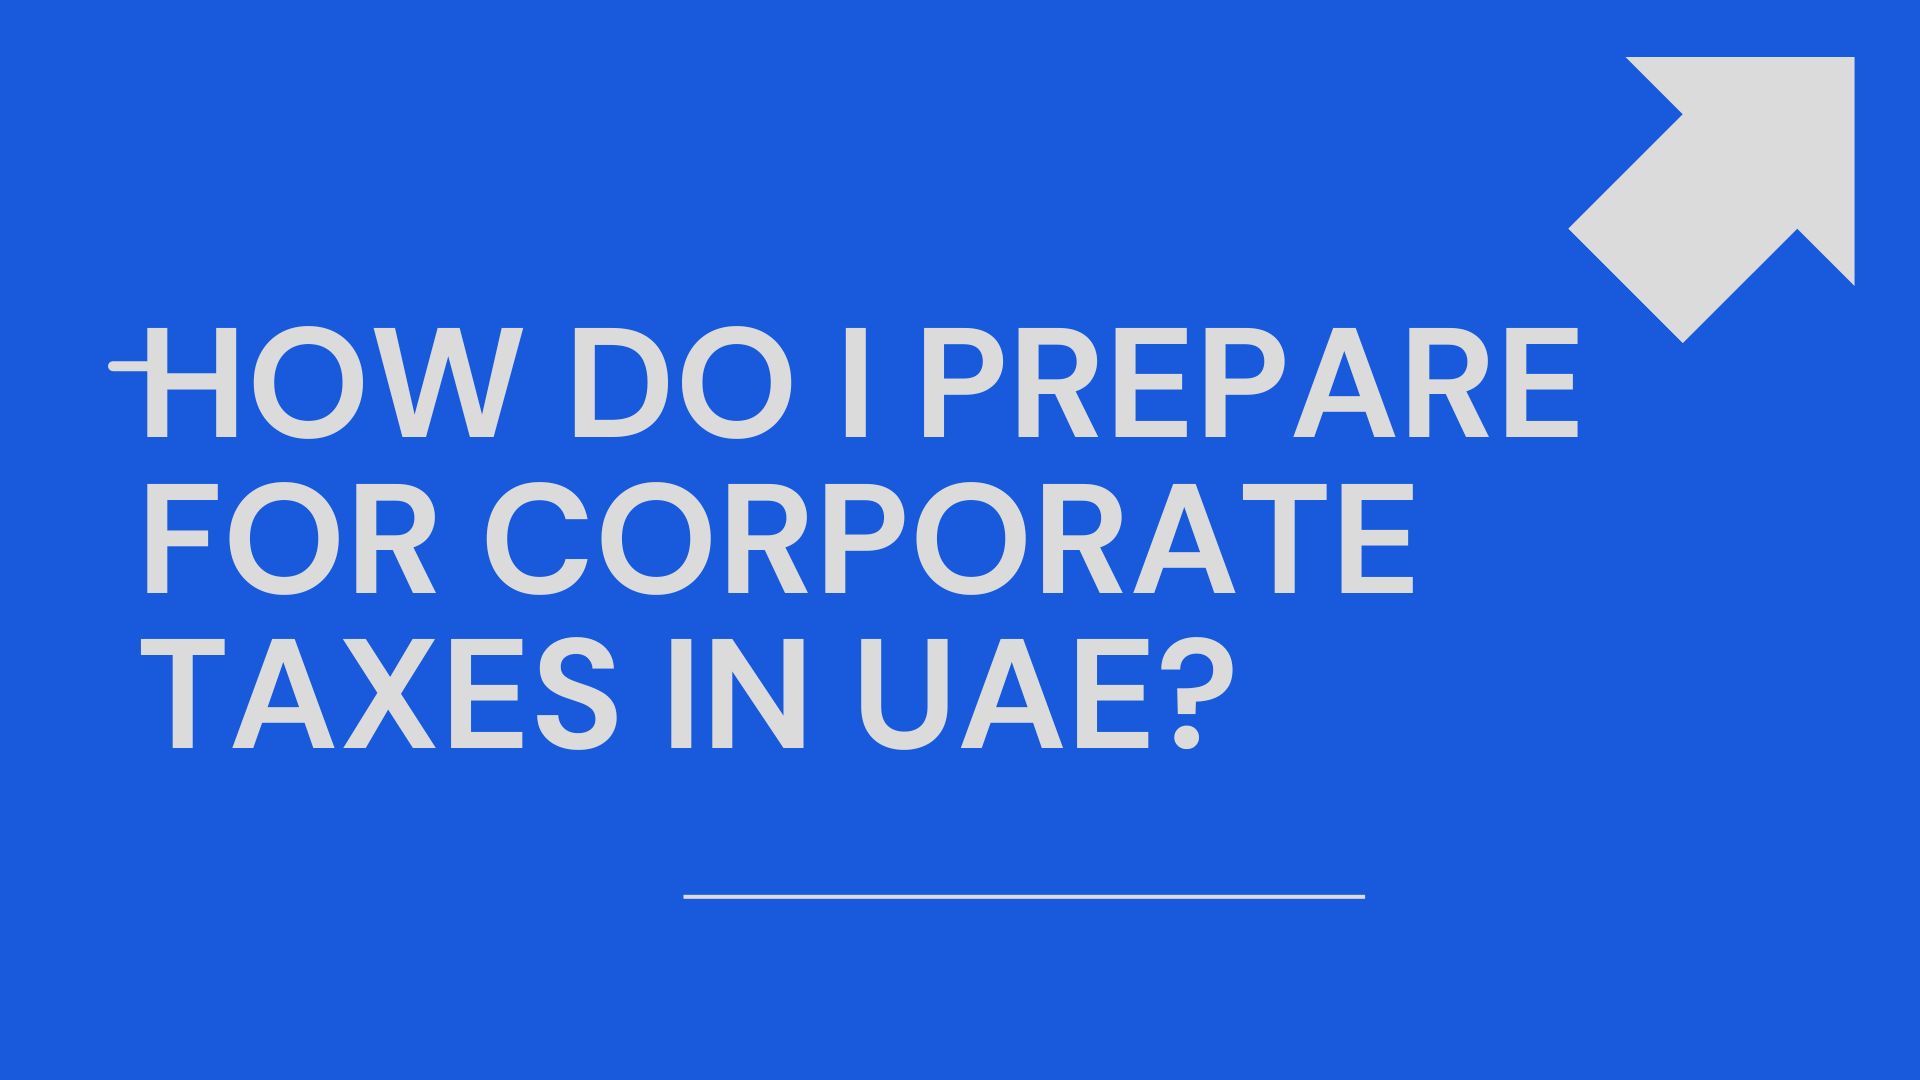 How-do-I-Prepare-for-Corporate-Taxes-in-UAE.